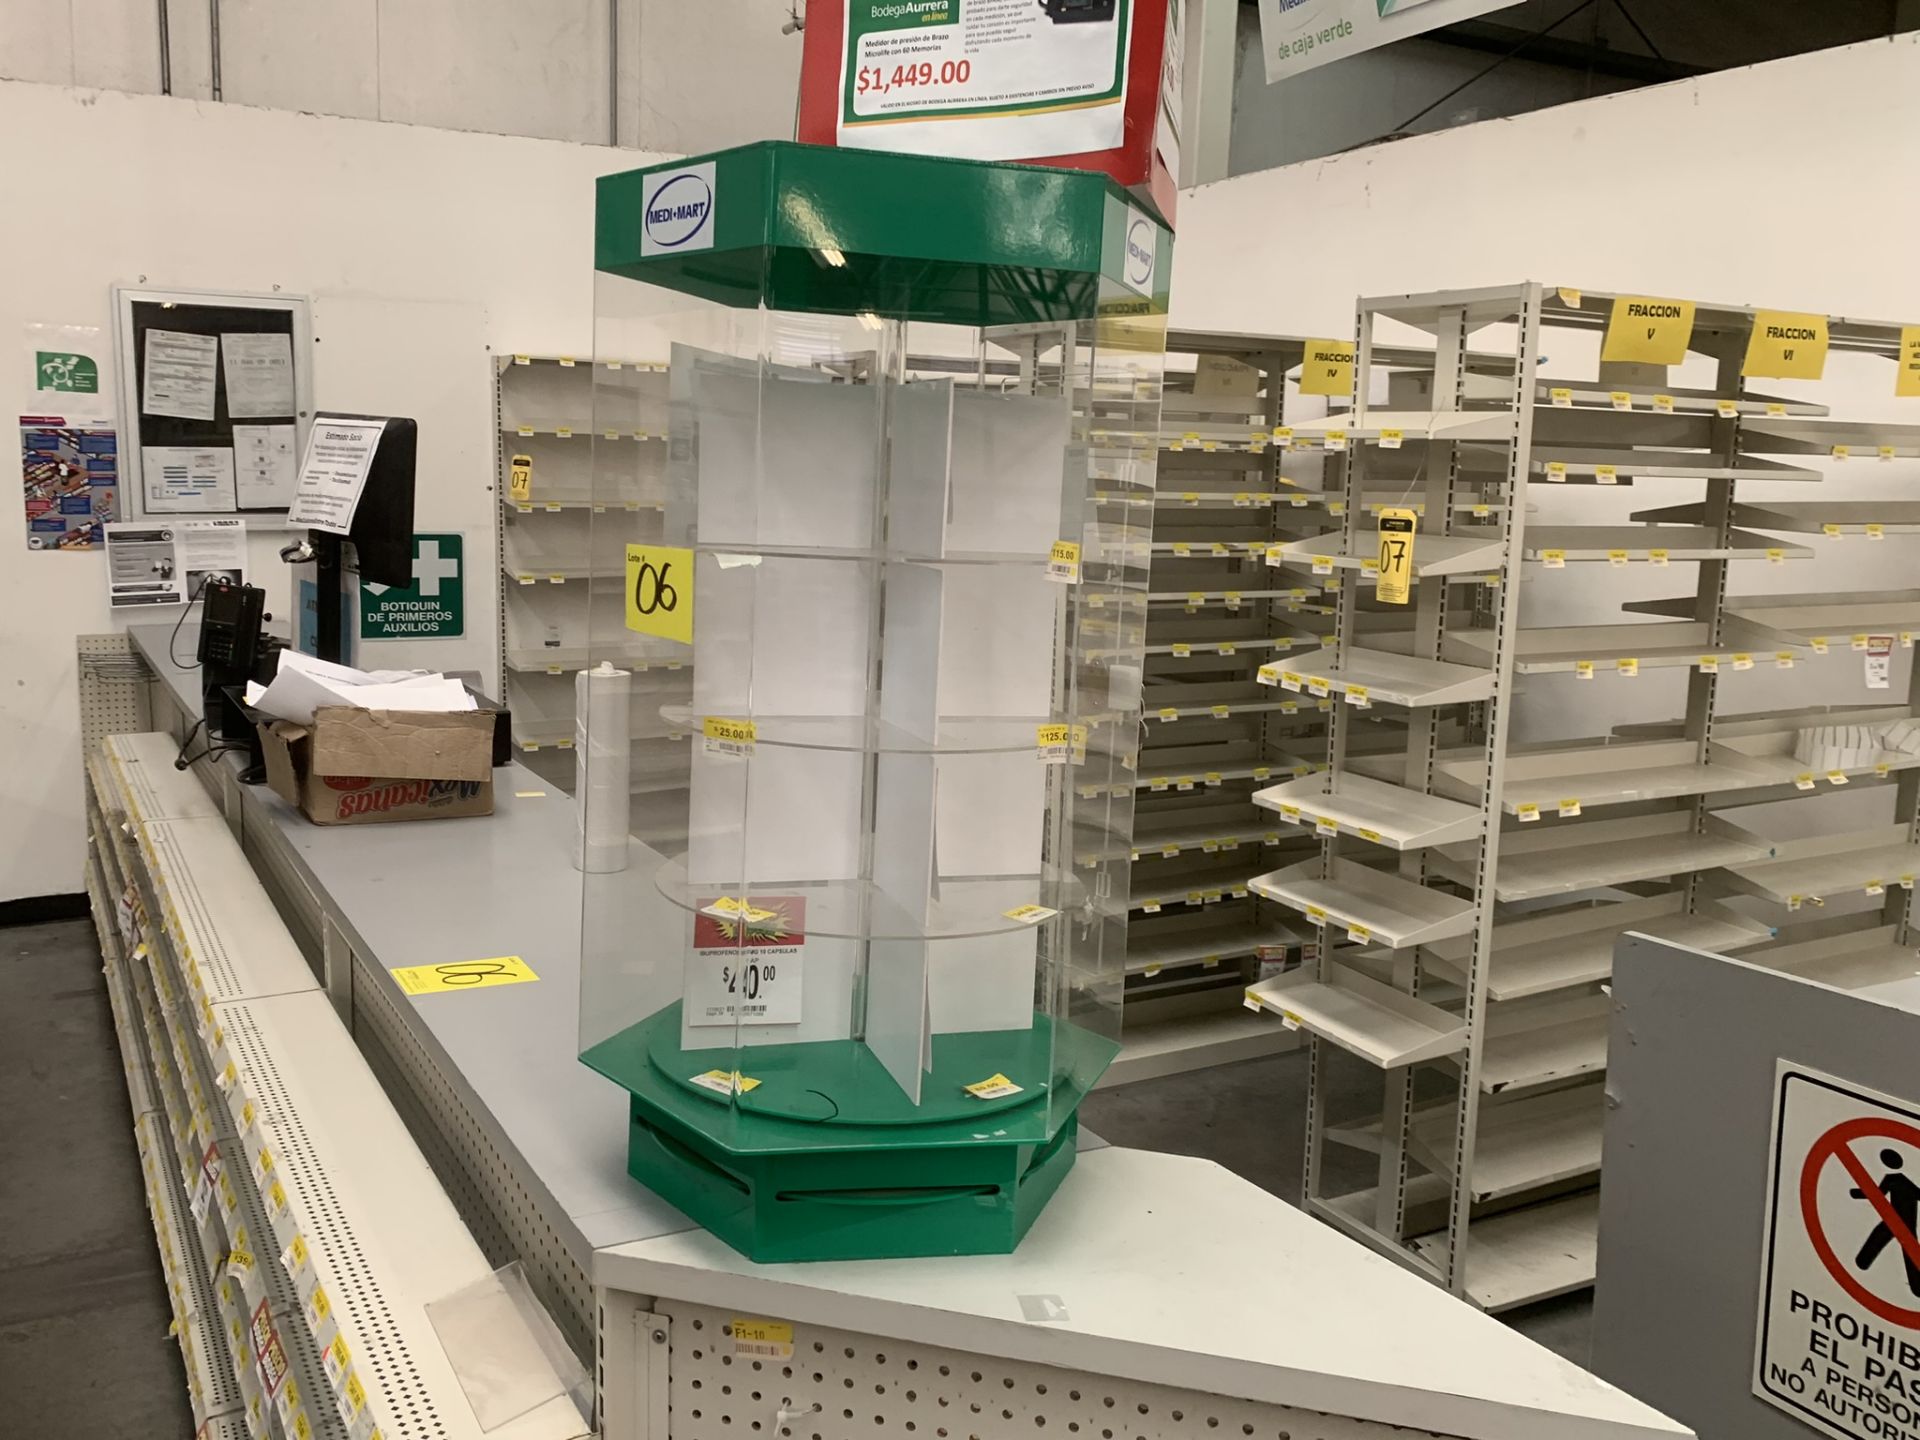 L-shaped counter for a pharmacy with a display of 31 shelves - Image 9 of 17